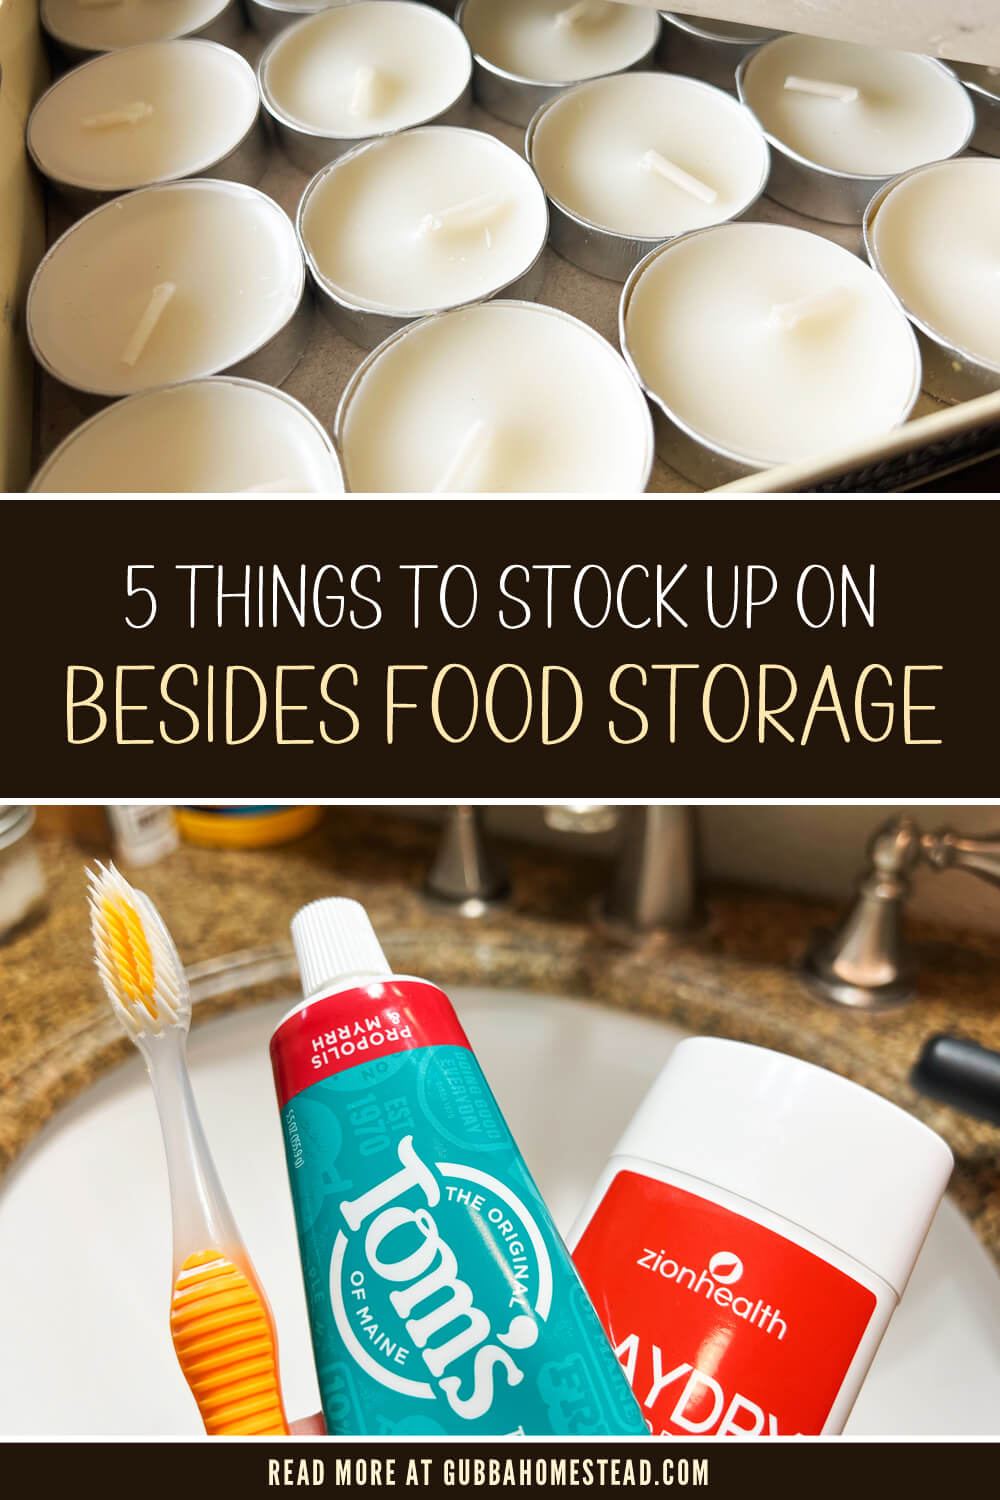 5 Things To Stock Up On Besides Food Storage